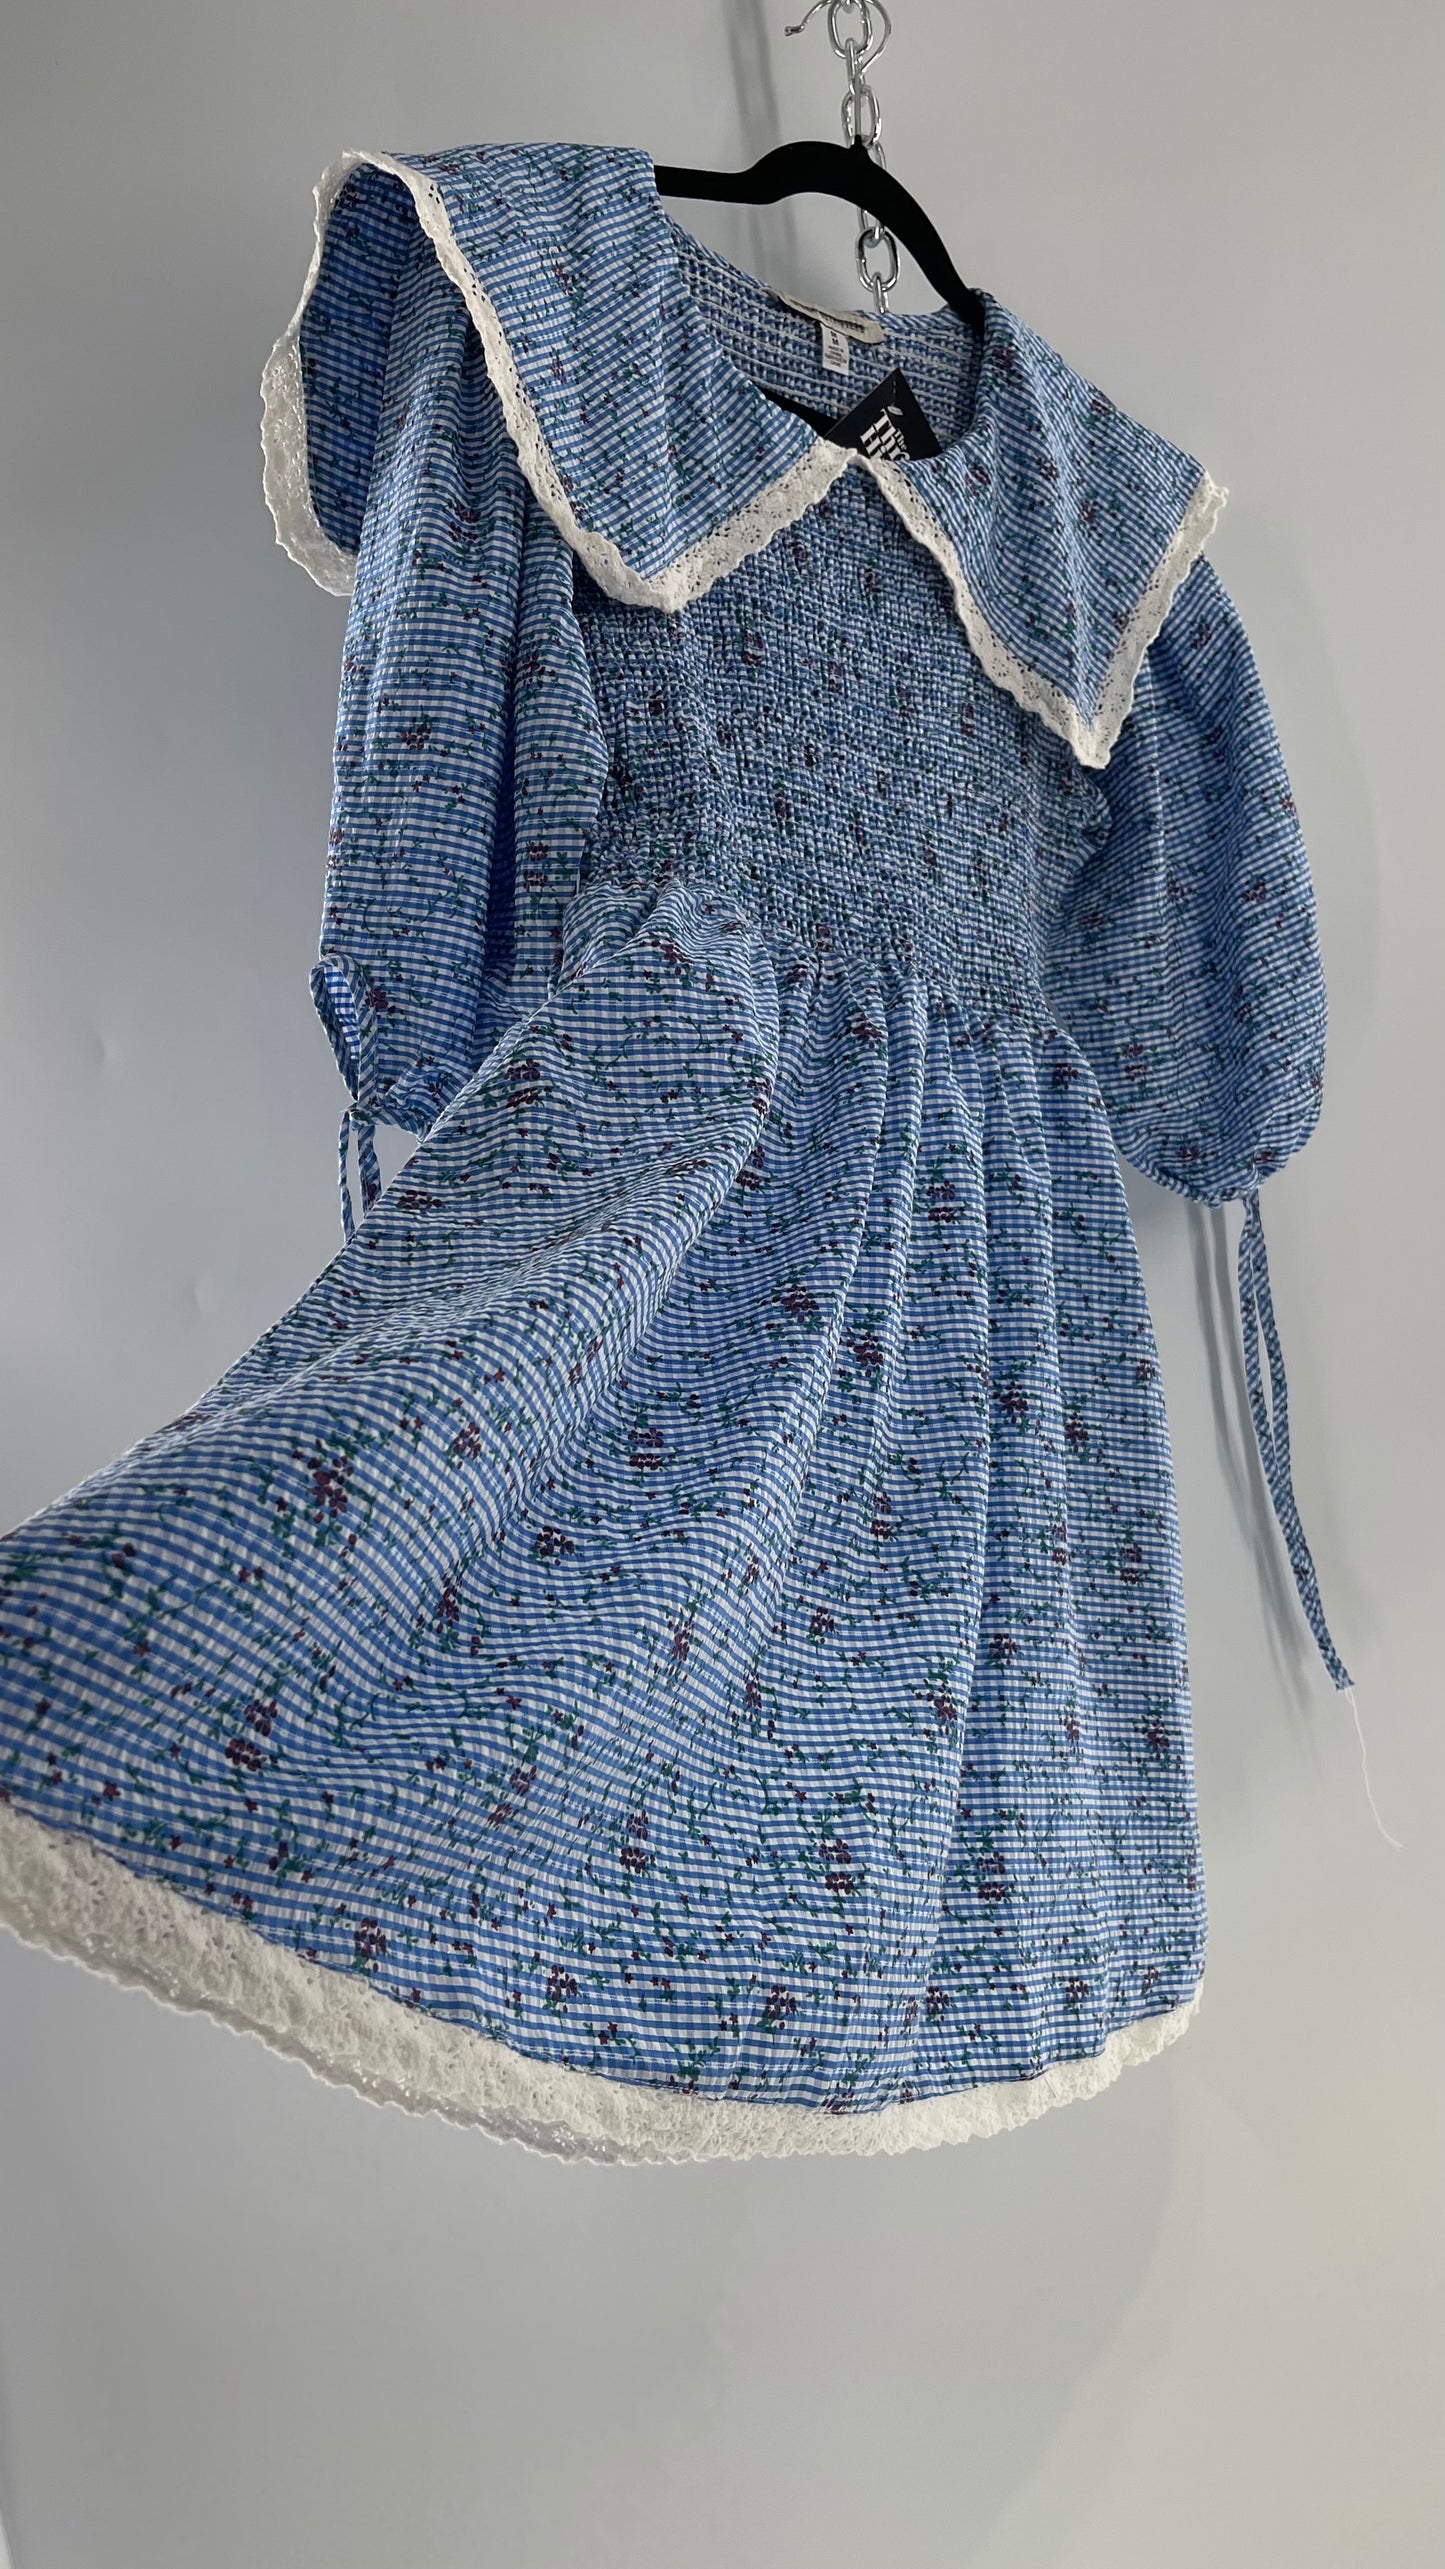 Urban Outfitters Blue Gingham Babydoll Dress with Lace Trim Collar and Smocked Bodice (Medium)